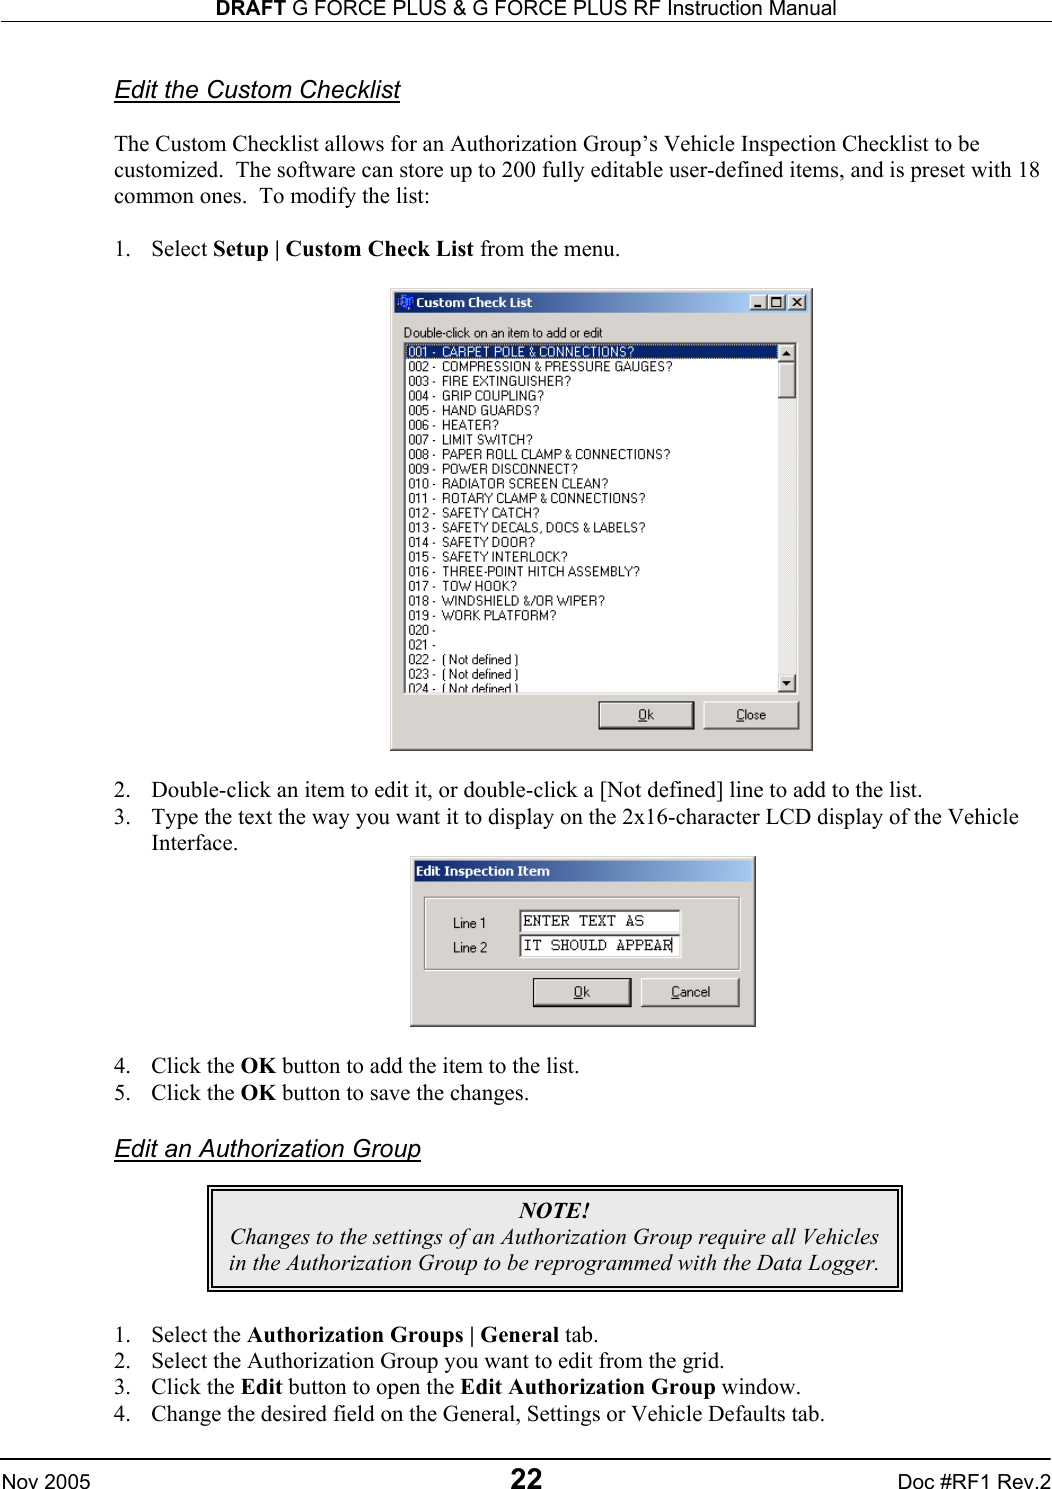 DRAFT G FORCE PLUS &amp; G FORCE PLUS RF Instruction Manual   Nov 2005 22 Doc #RF1 Rev.2  Edit the Custom Checklist  The Custom Checklist allows for an Authorization Group’s Vehicle Inspection Checklist to be customized.  The software can store up to 200 fully editable user-defined items, and is preset with 18 common ones.  To modify the list:  1. Select Setup | Custom Check List from the menu.    2.  Double-click an item to edit it, or double-click a [Not defined] line to add to the list. 3.  Type the text the way you want it to display on the 2x16-character LCD display of the Vehicle Interface.   4. Click the OK button to add the item to the list. 5. Click the OK button to save the changes.  Edit an Authorization Group       1. Select the Authorization Groups | General tab. 2.  Select the Authorization Group you want to edit from the grid. 3. Click the Edit button to open the Edit Authorization Group window. 4.  Change the desired field on the General, Settings or Vehicle Defaults tab. NOTE! Changes to the settings of an Authorization Group require all Vehicles in the Authorization Group to be reprogrammed with the Data Logger. 